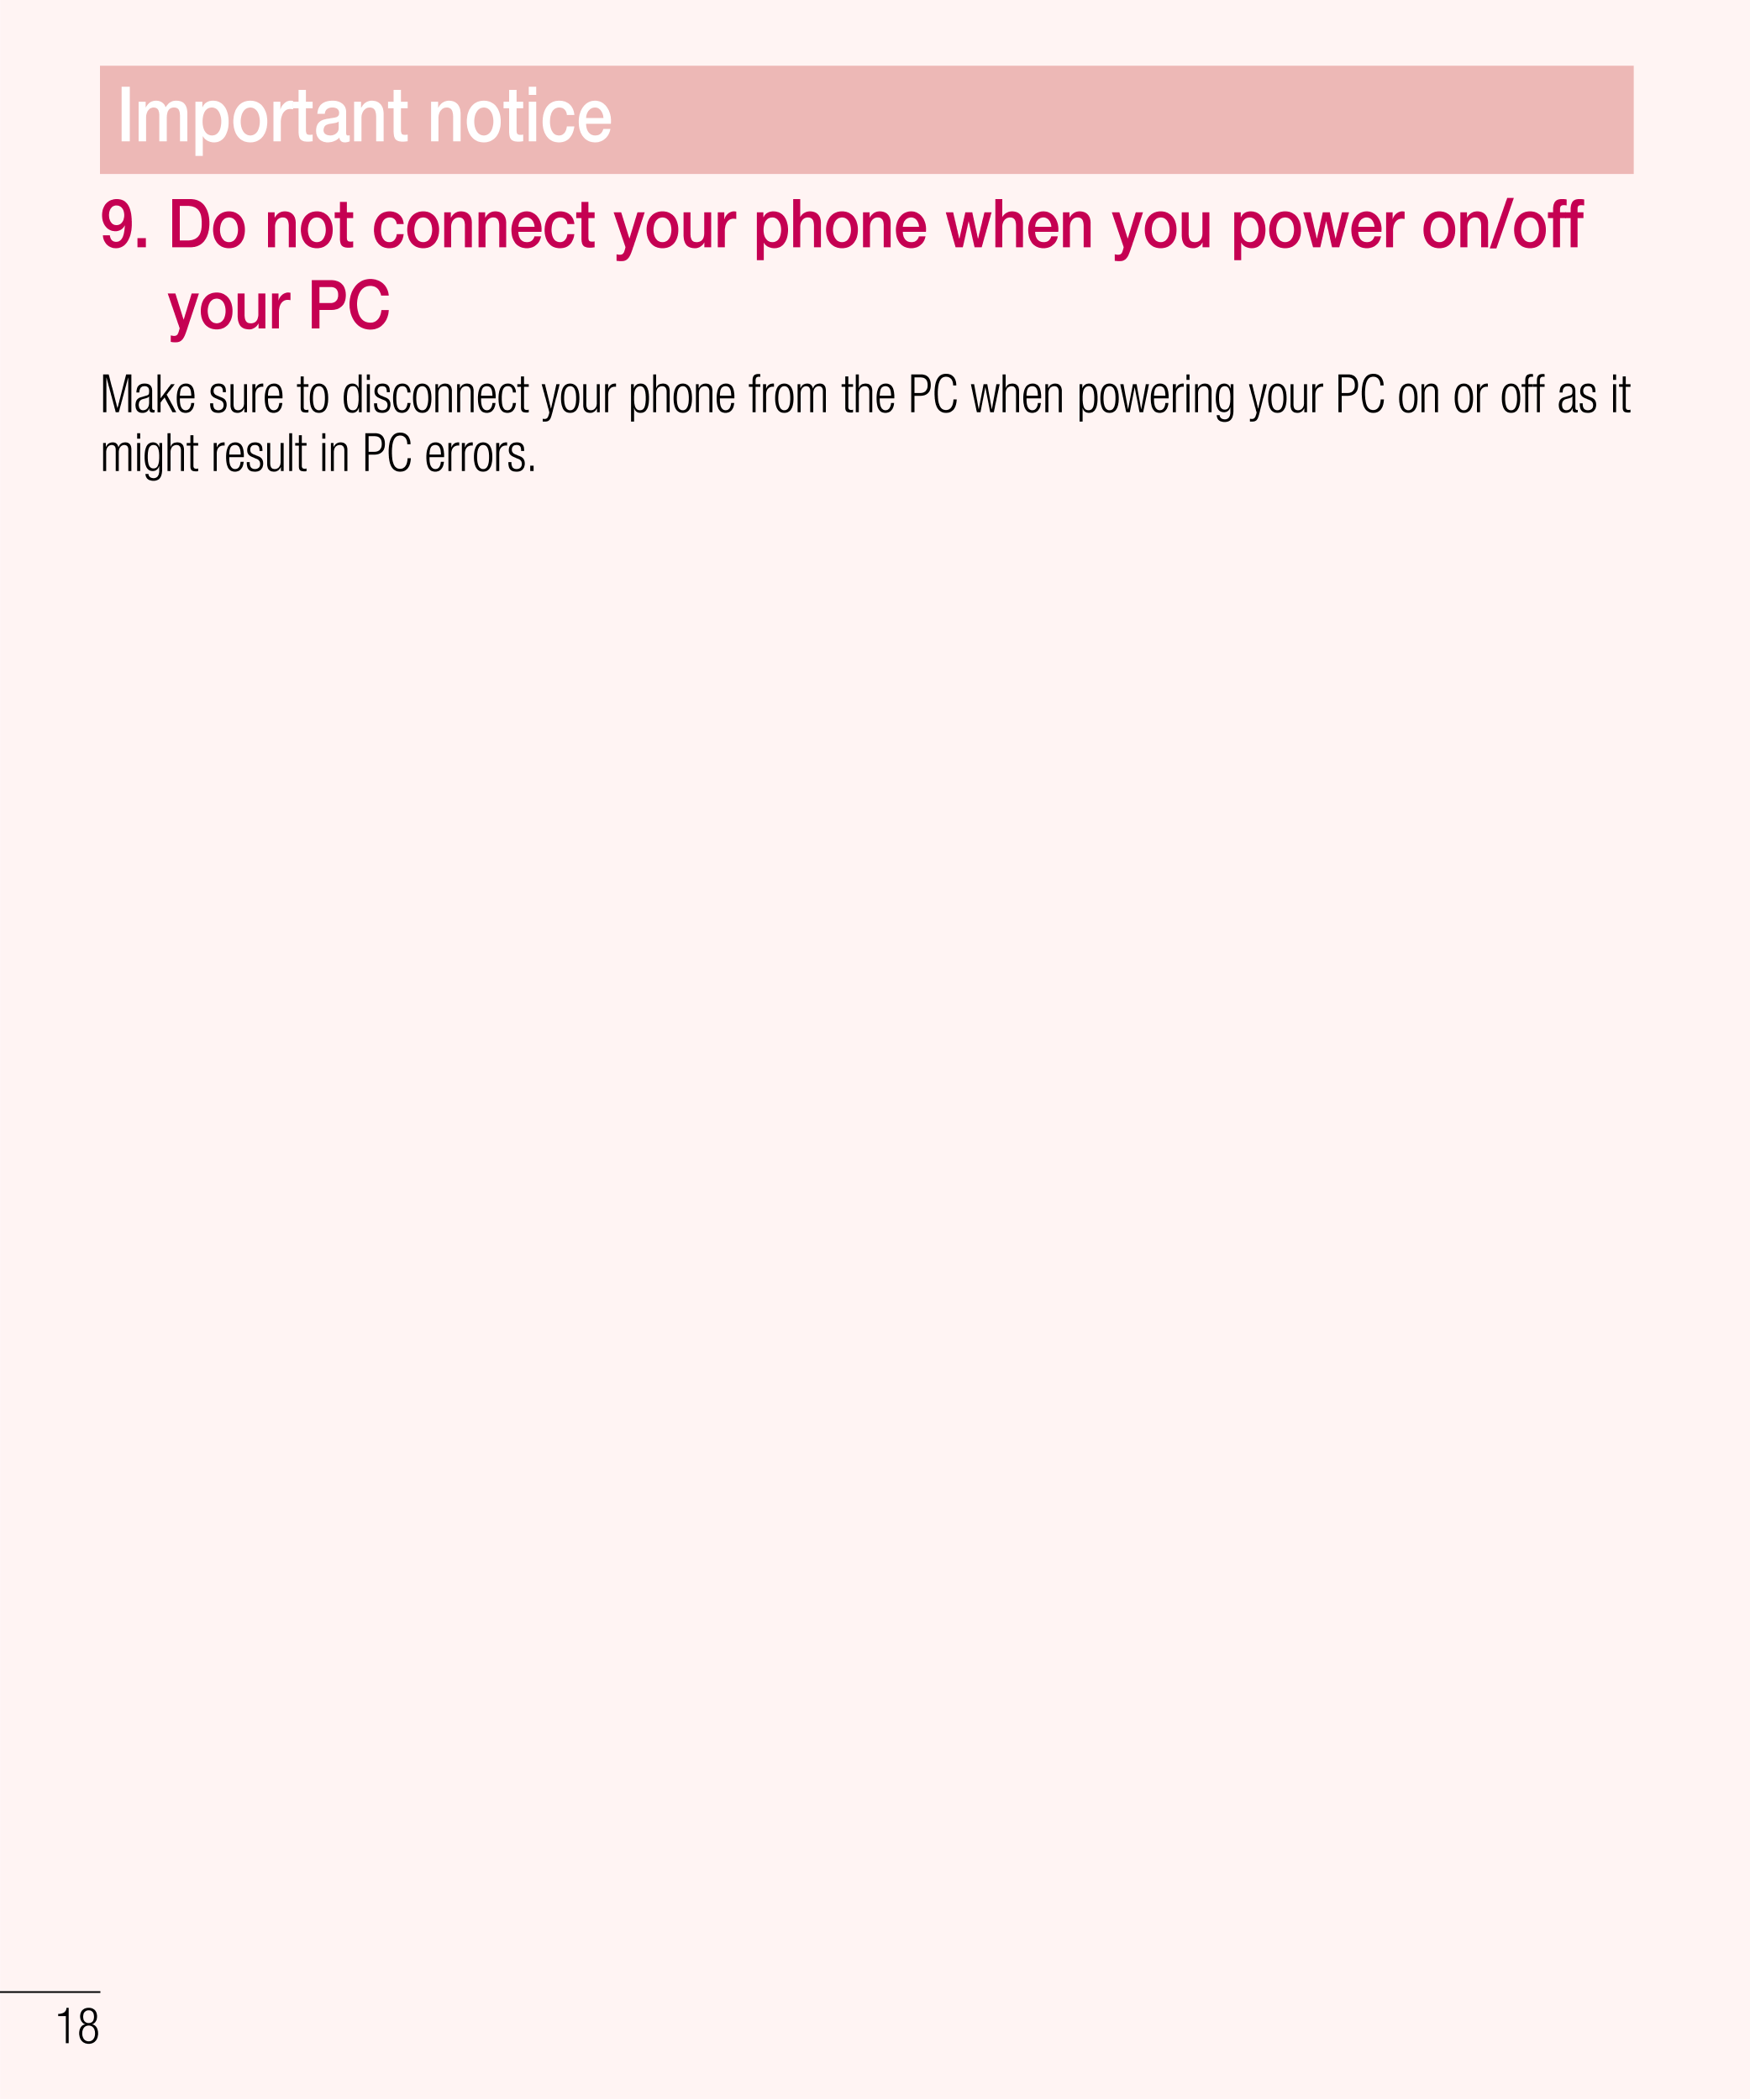 Important notice
9.   Do not connect your phone when you power on/off 
your PC
Make sure to disconnect your phone from the PC wh